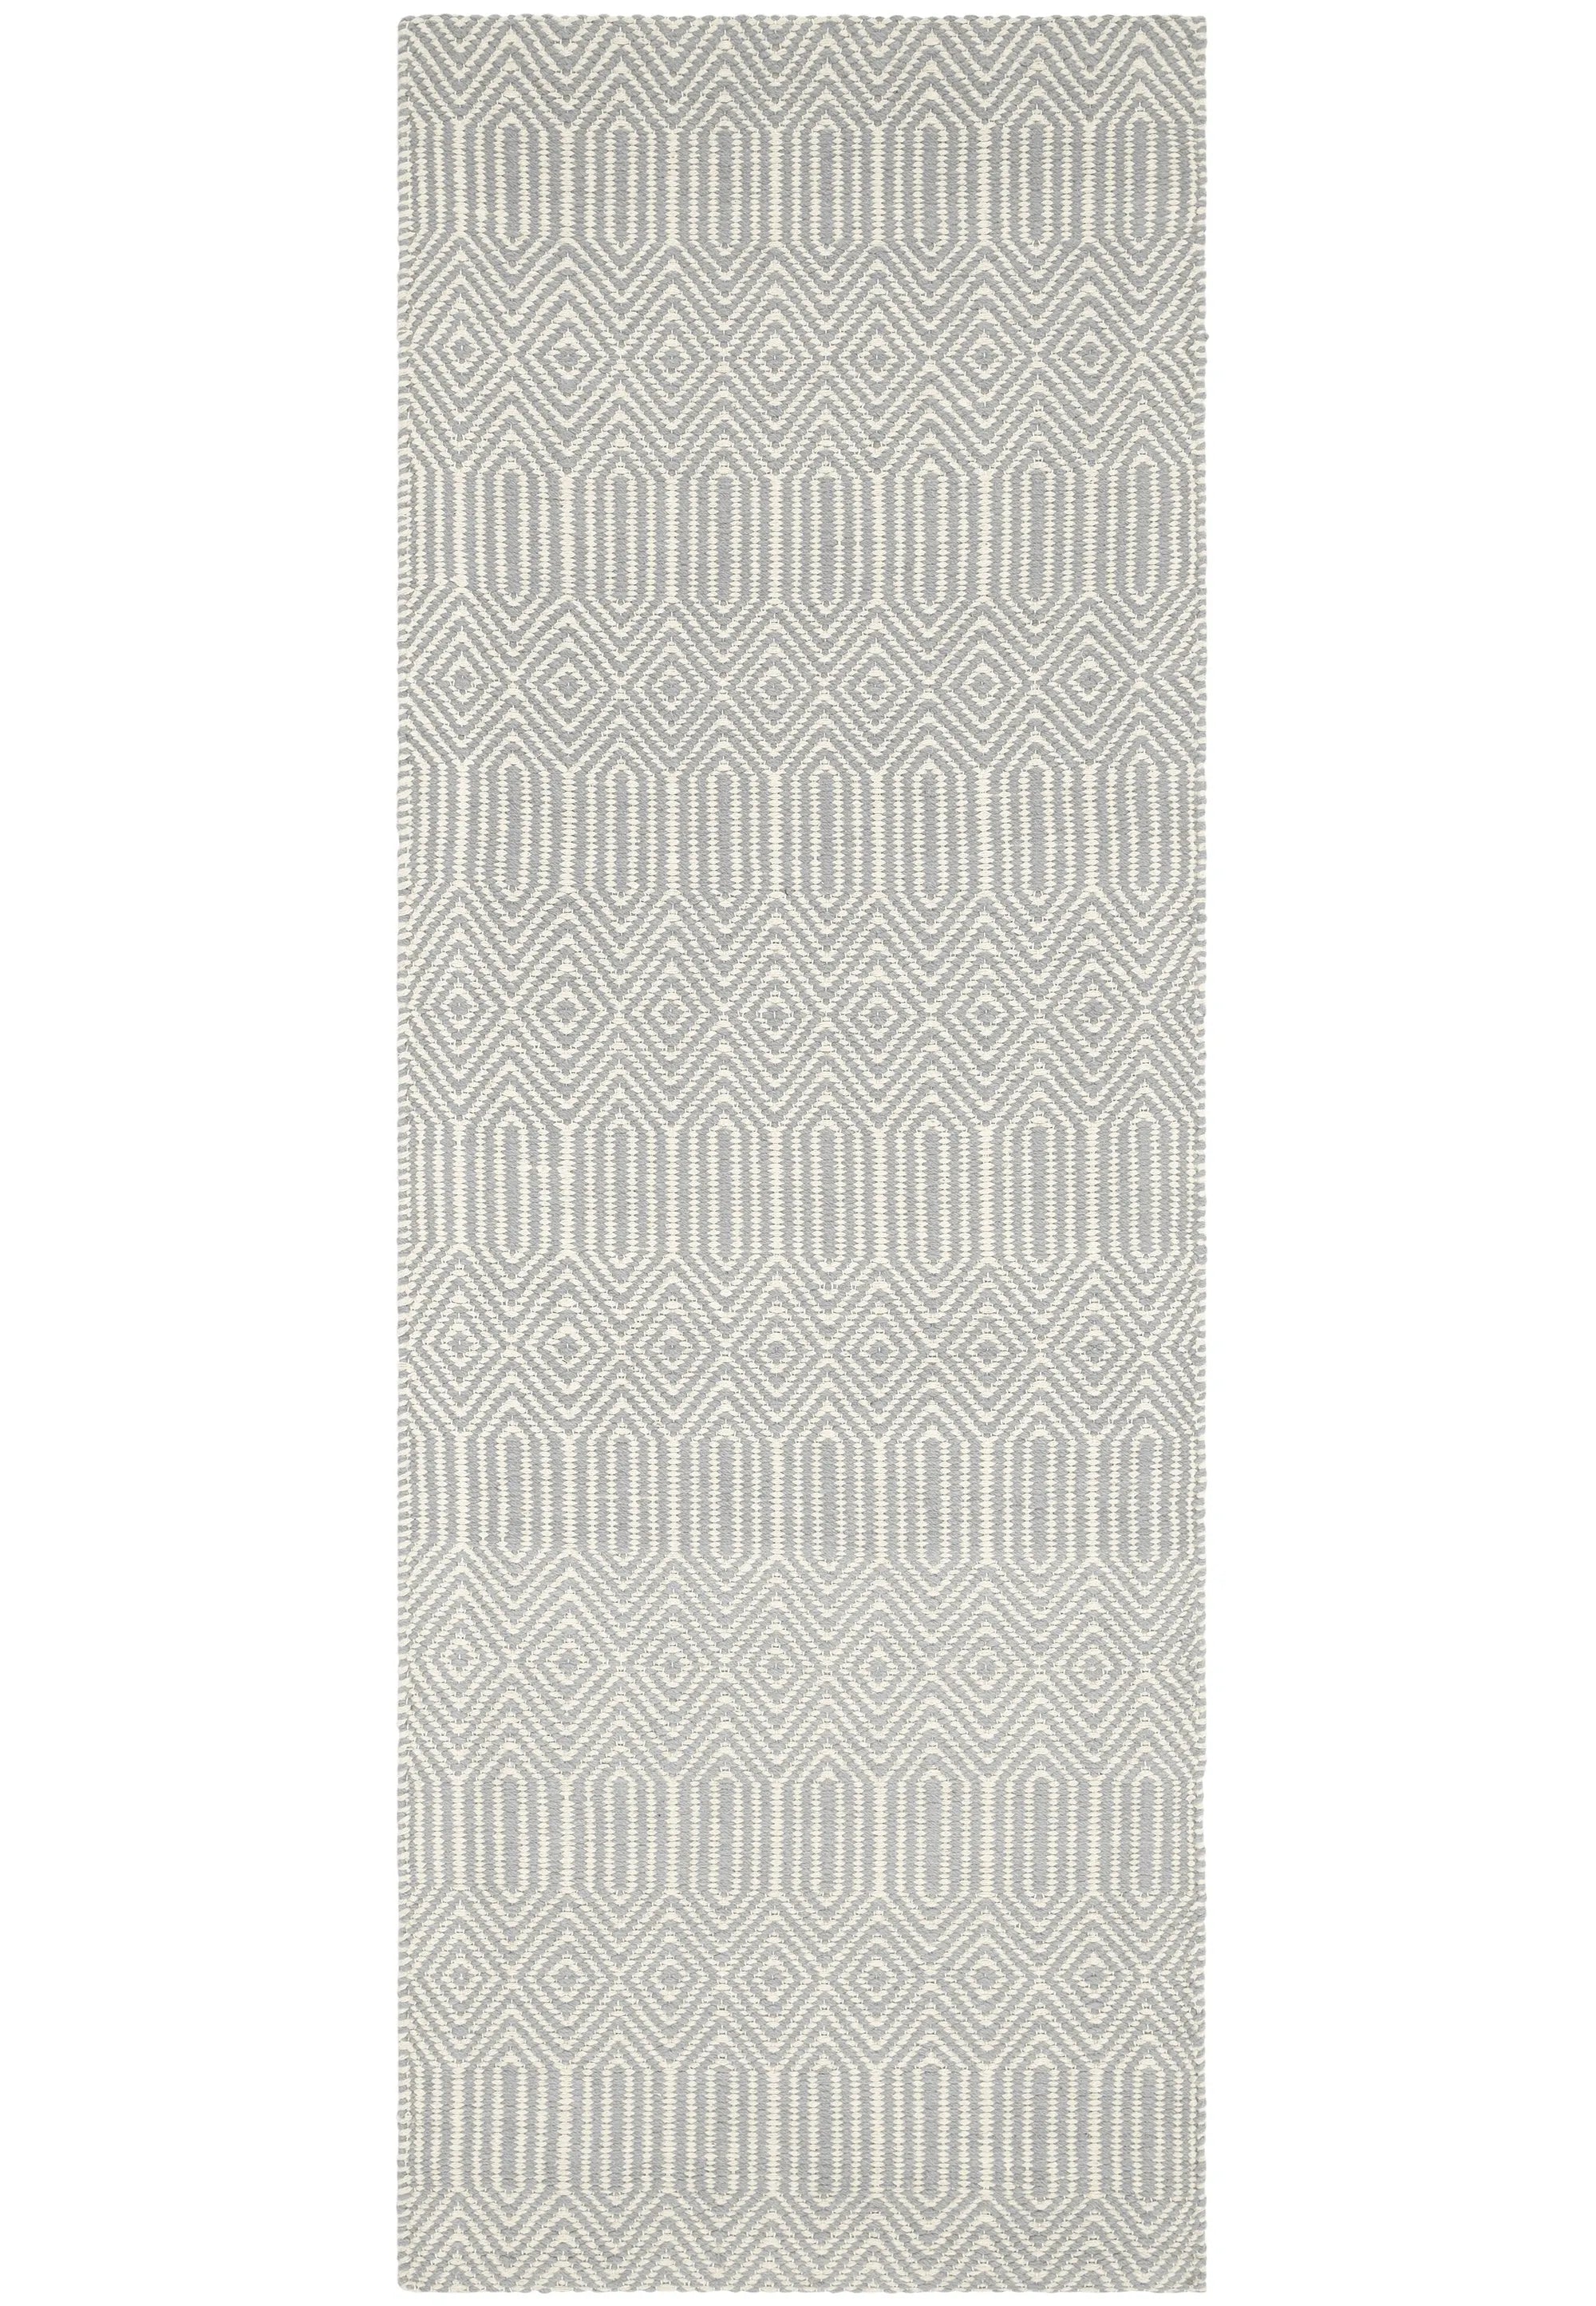 taupe and white runner with a geometric aztec pattern